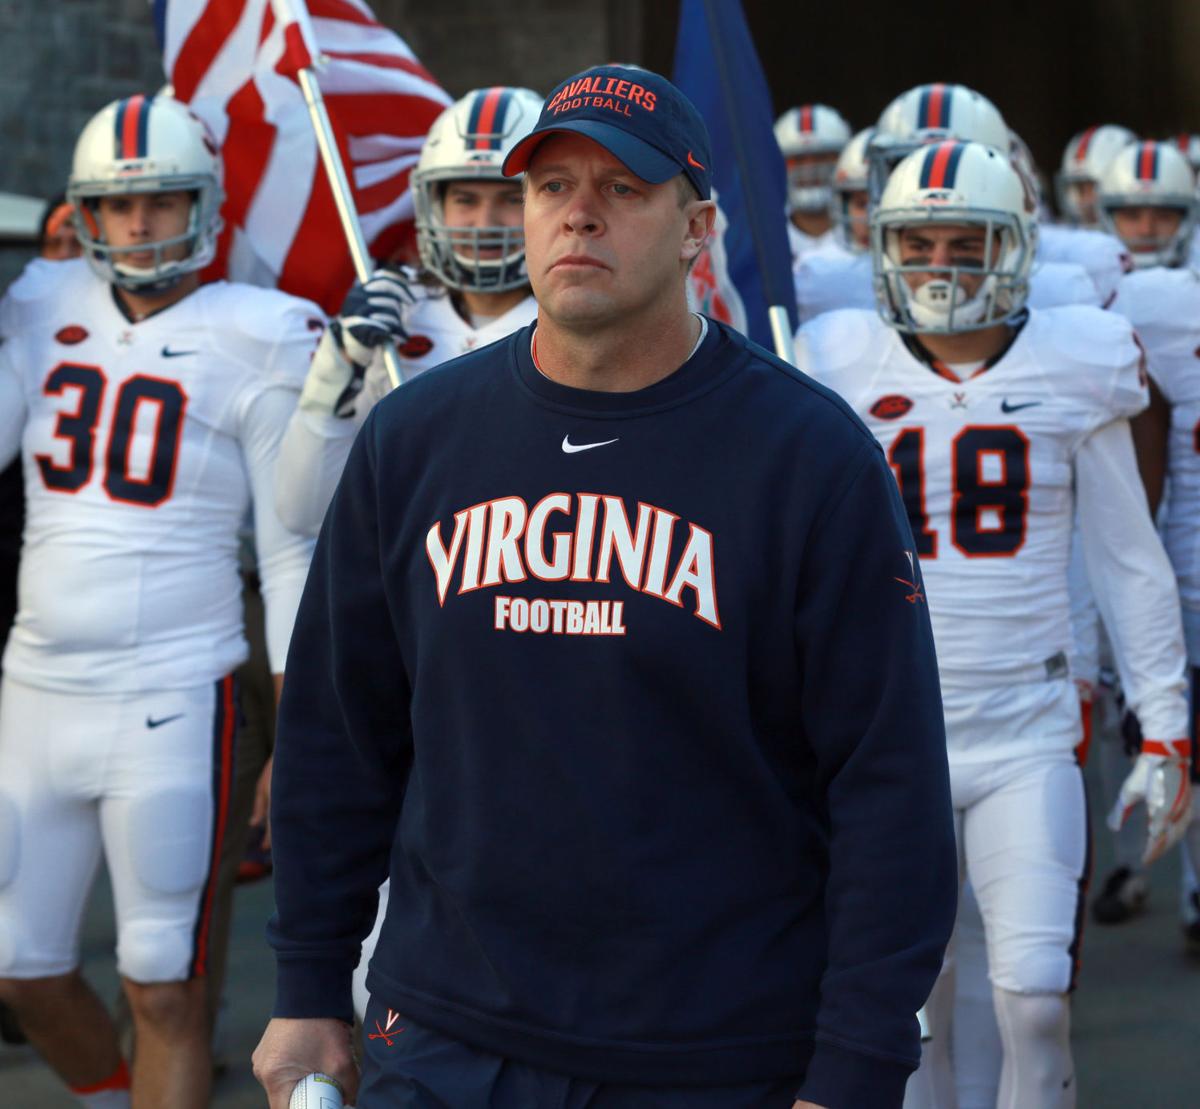 After difficult first season, Mendenhall continues rebuild of Virginia